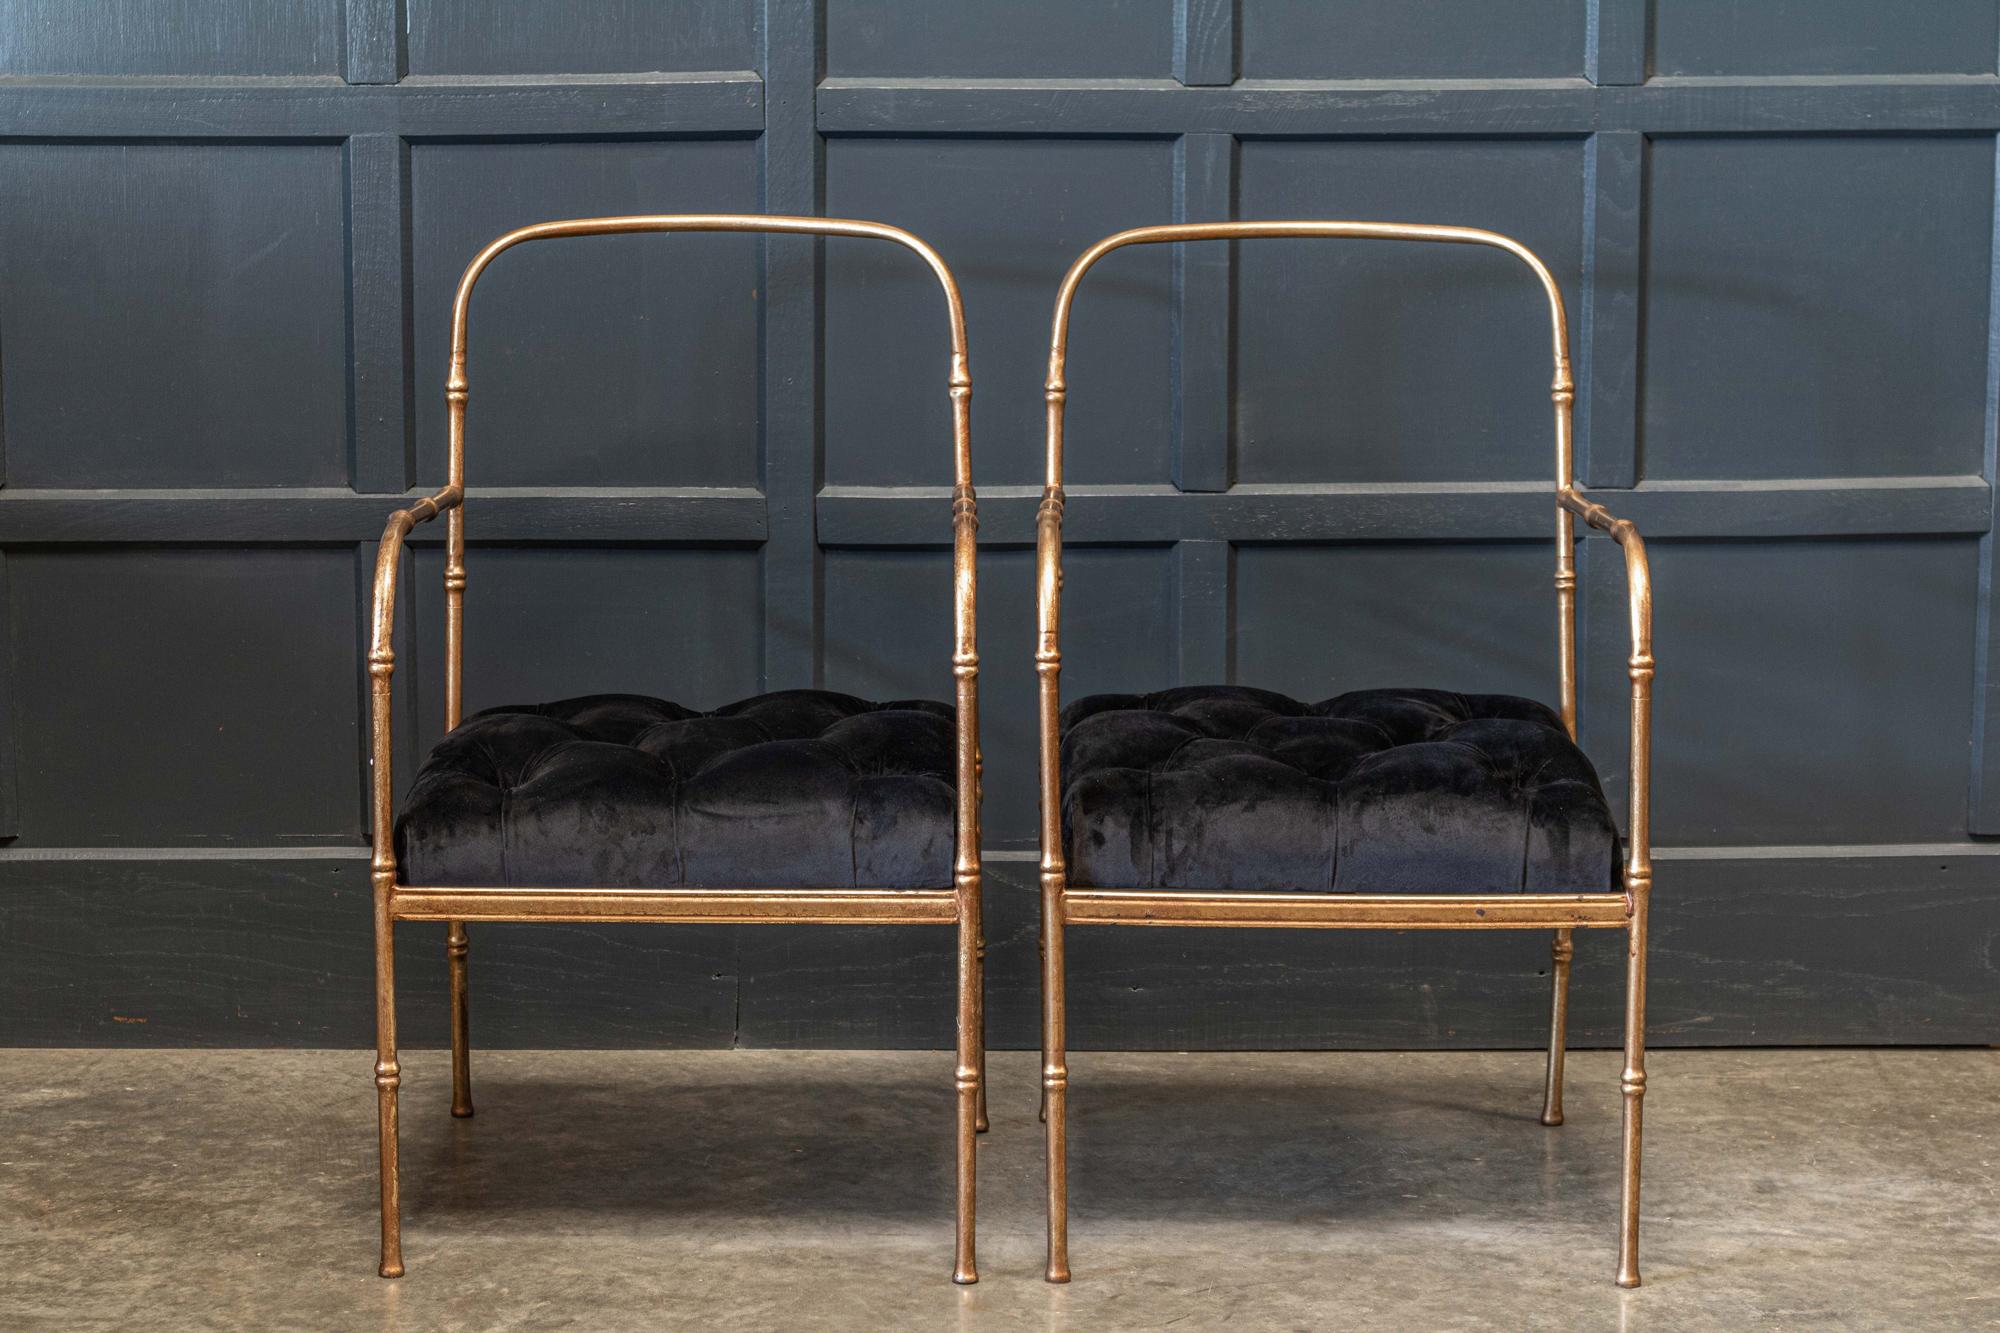 Circa. 1950's

Pair French mid century Jacques Adnet style faux bamboo gilt iron armchairs.
Reupholstered in buttoned deep pile rich black velvet.

Price is per pair
(3 pairs available in this size 85cm height, a further 3 pairs available at